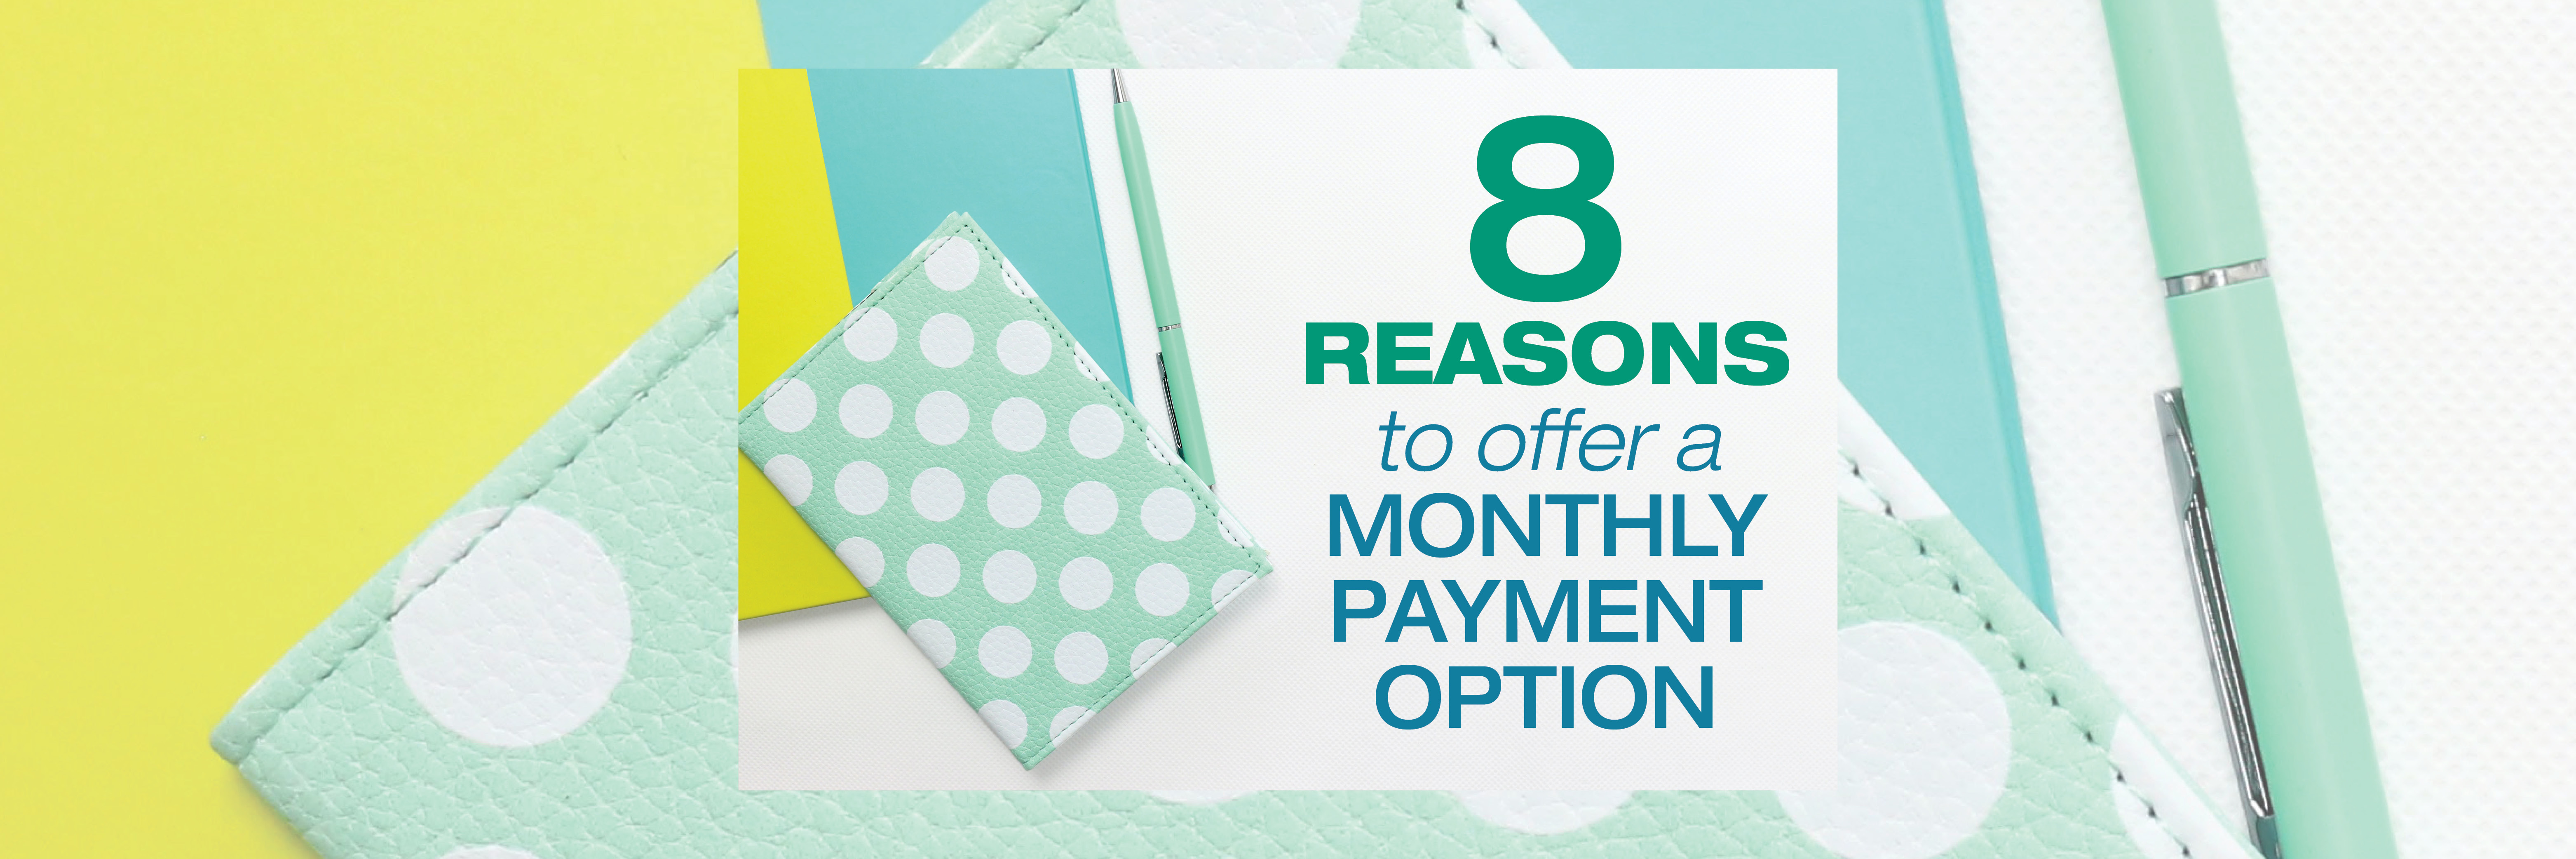 8 Reasons to Offer a Monthly Payment Option